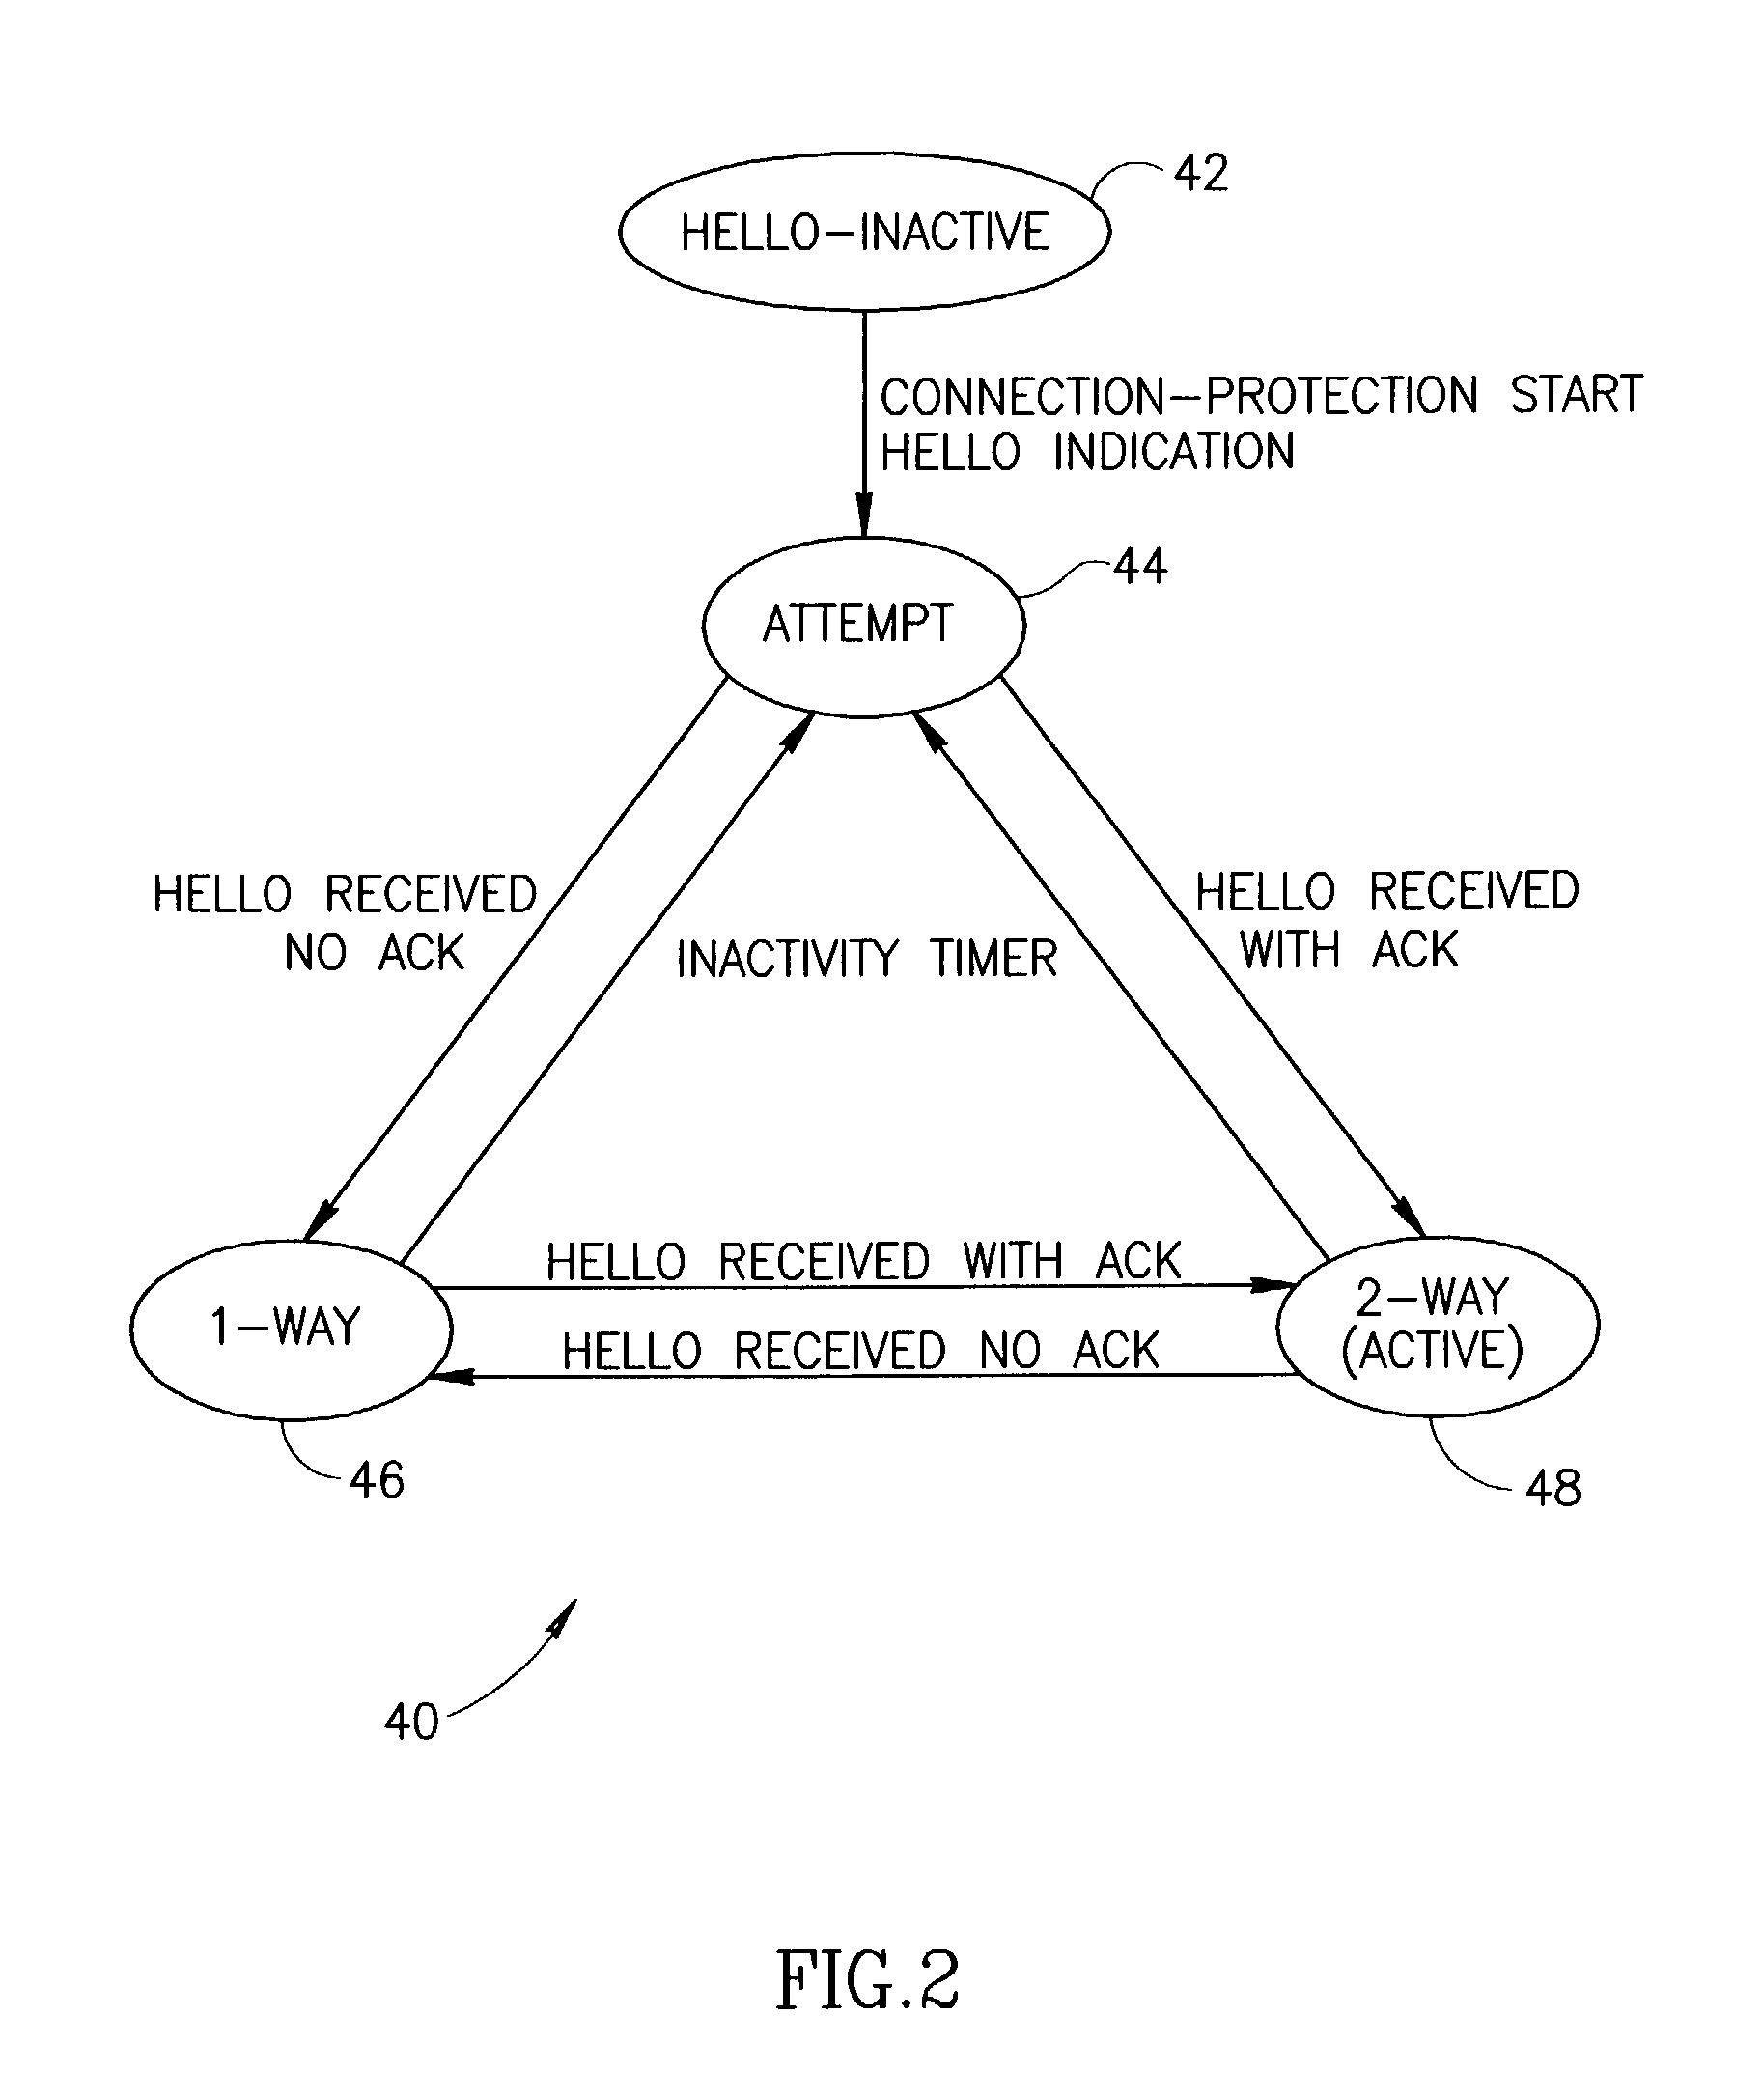 Fast connection protection in a virtual local area network based stack environment